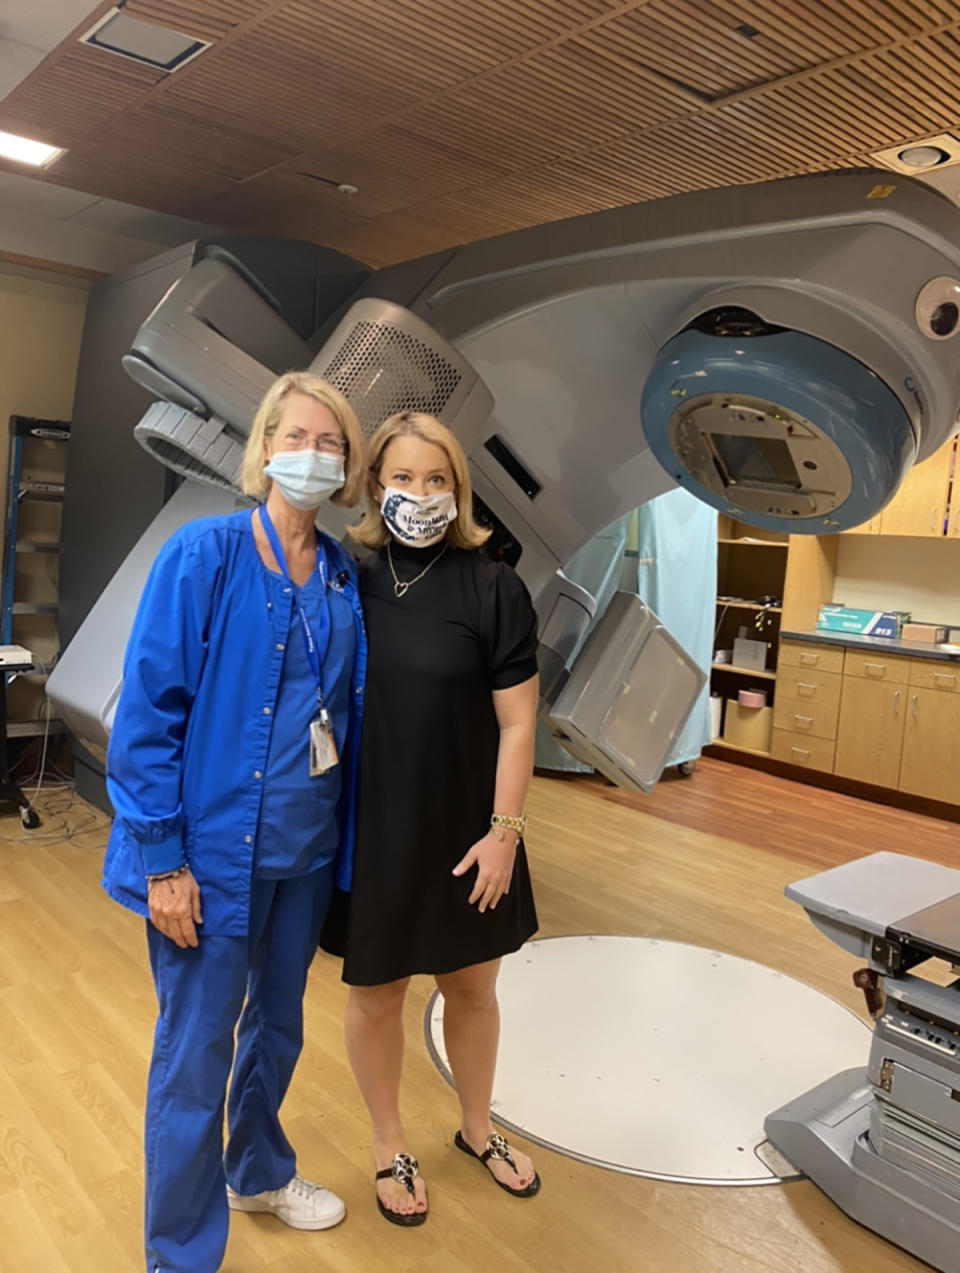 Having pelvic radiation can be really tough on the pelvic floor. Ann Heslin has been going to pelvic floor physical therapy to help her body recover from cancer treatments. (Courtesy Ann Heslin)